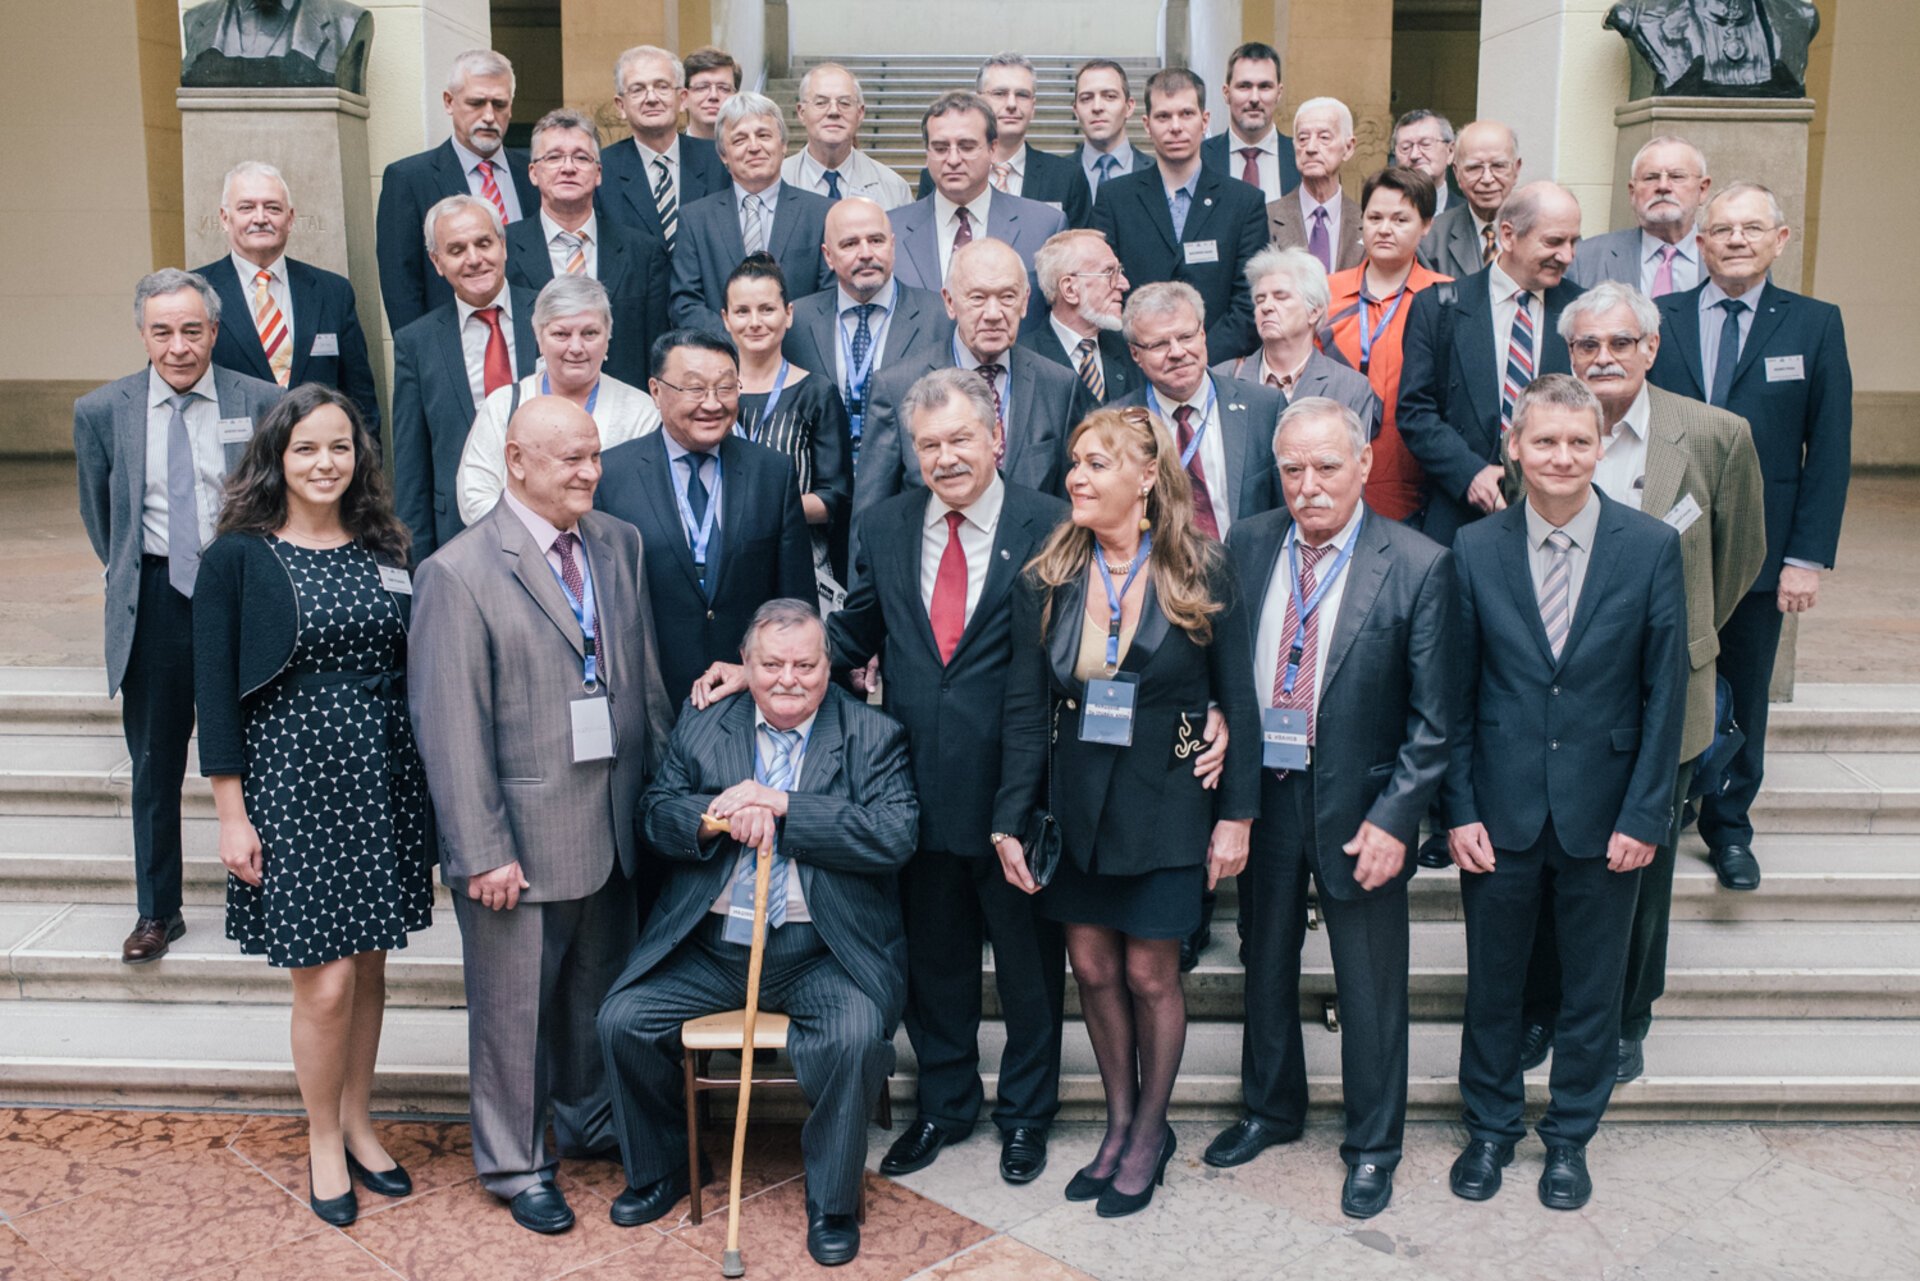 Guests and speakers at the ‘ŰR-LÉPTÉK’ conference 